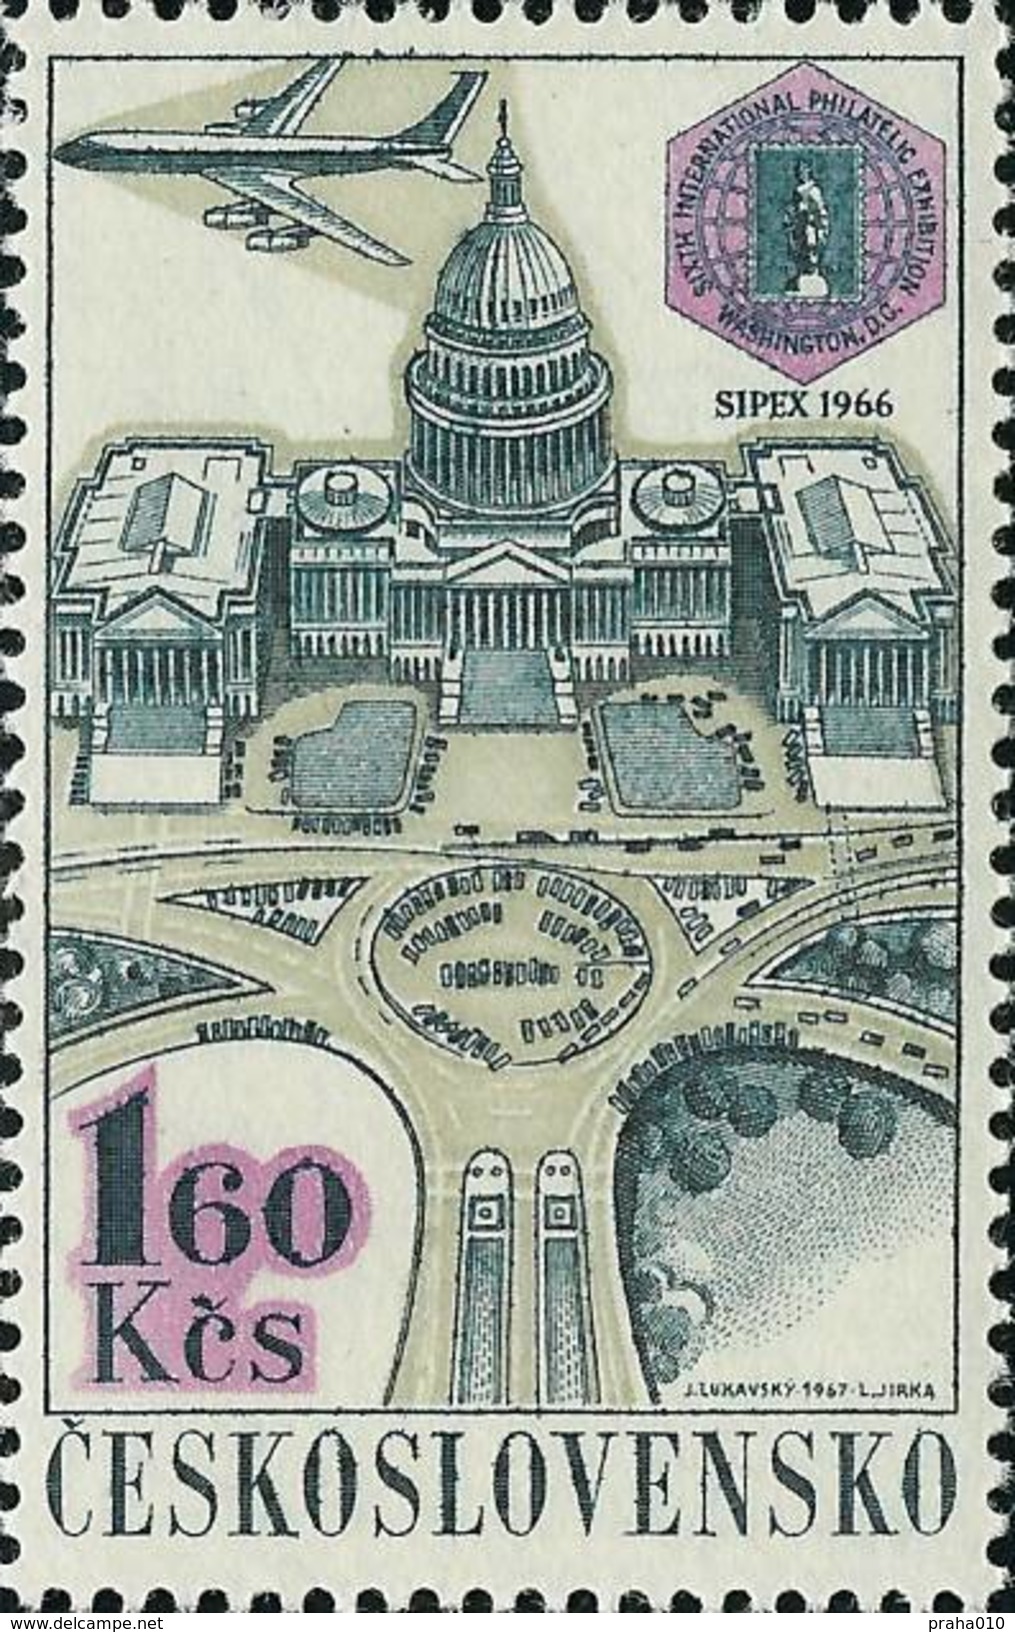 Czechoslovakia / Stamps (1967) L0060 (Air Mail Stamp): PRAGA 68 (Capitol Building, USA, SIPEX 65); Painter: J. Lukavsky - Luchtpost